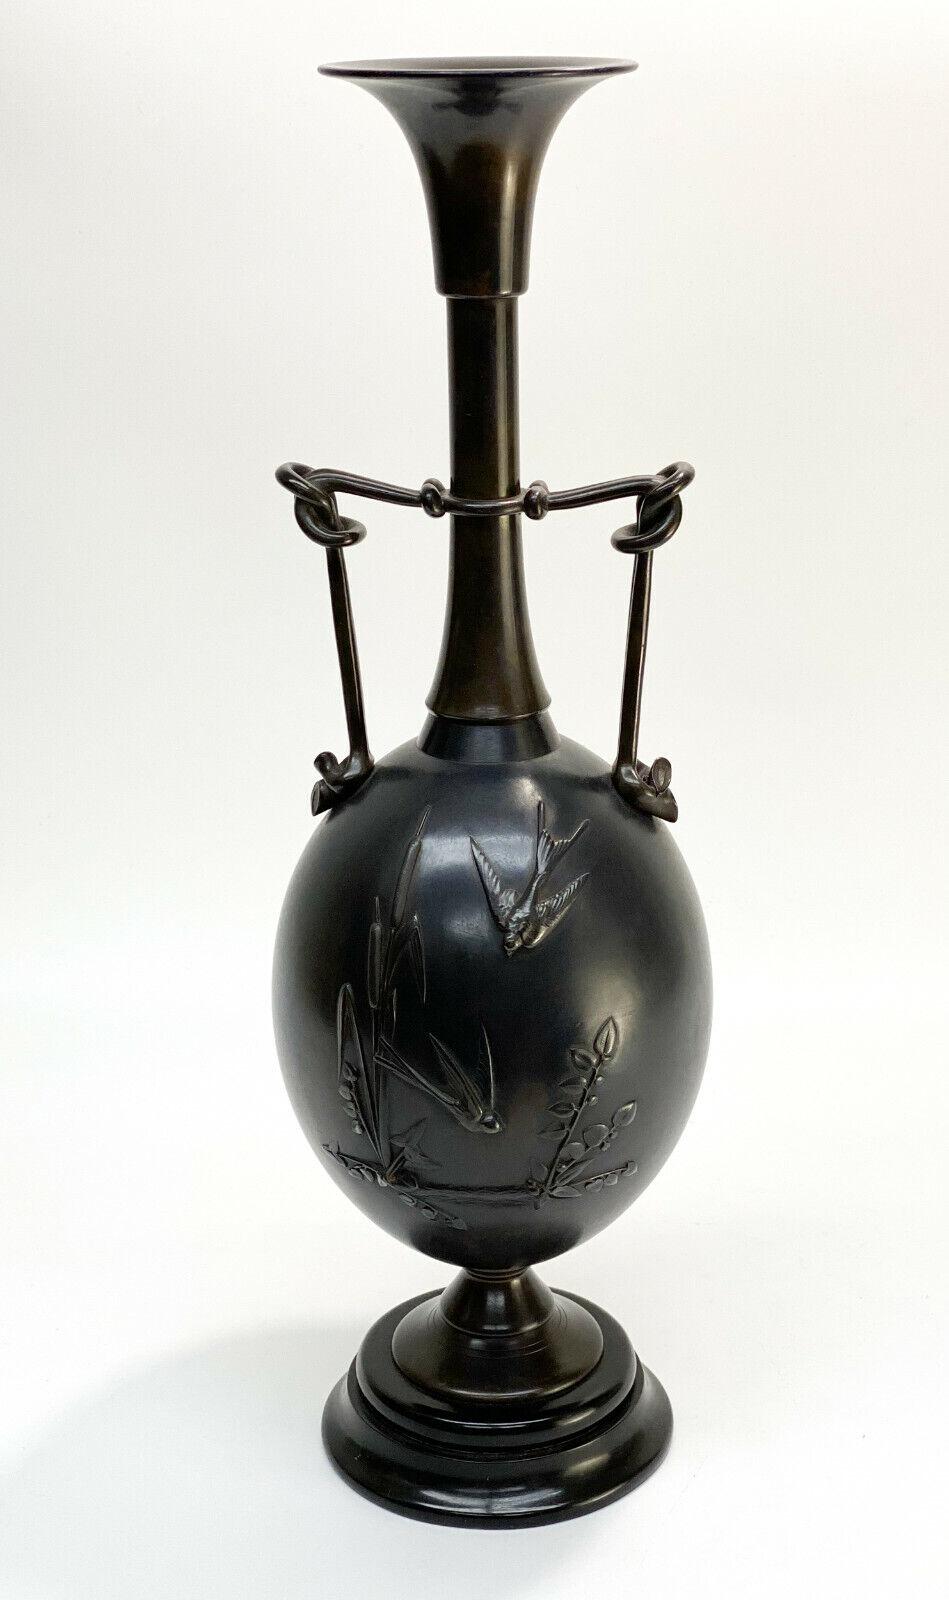 19th Century Henry Cahieux Barbedienne French Patinated Bronze Japonism Twin Handled Urn For Sale